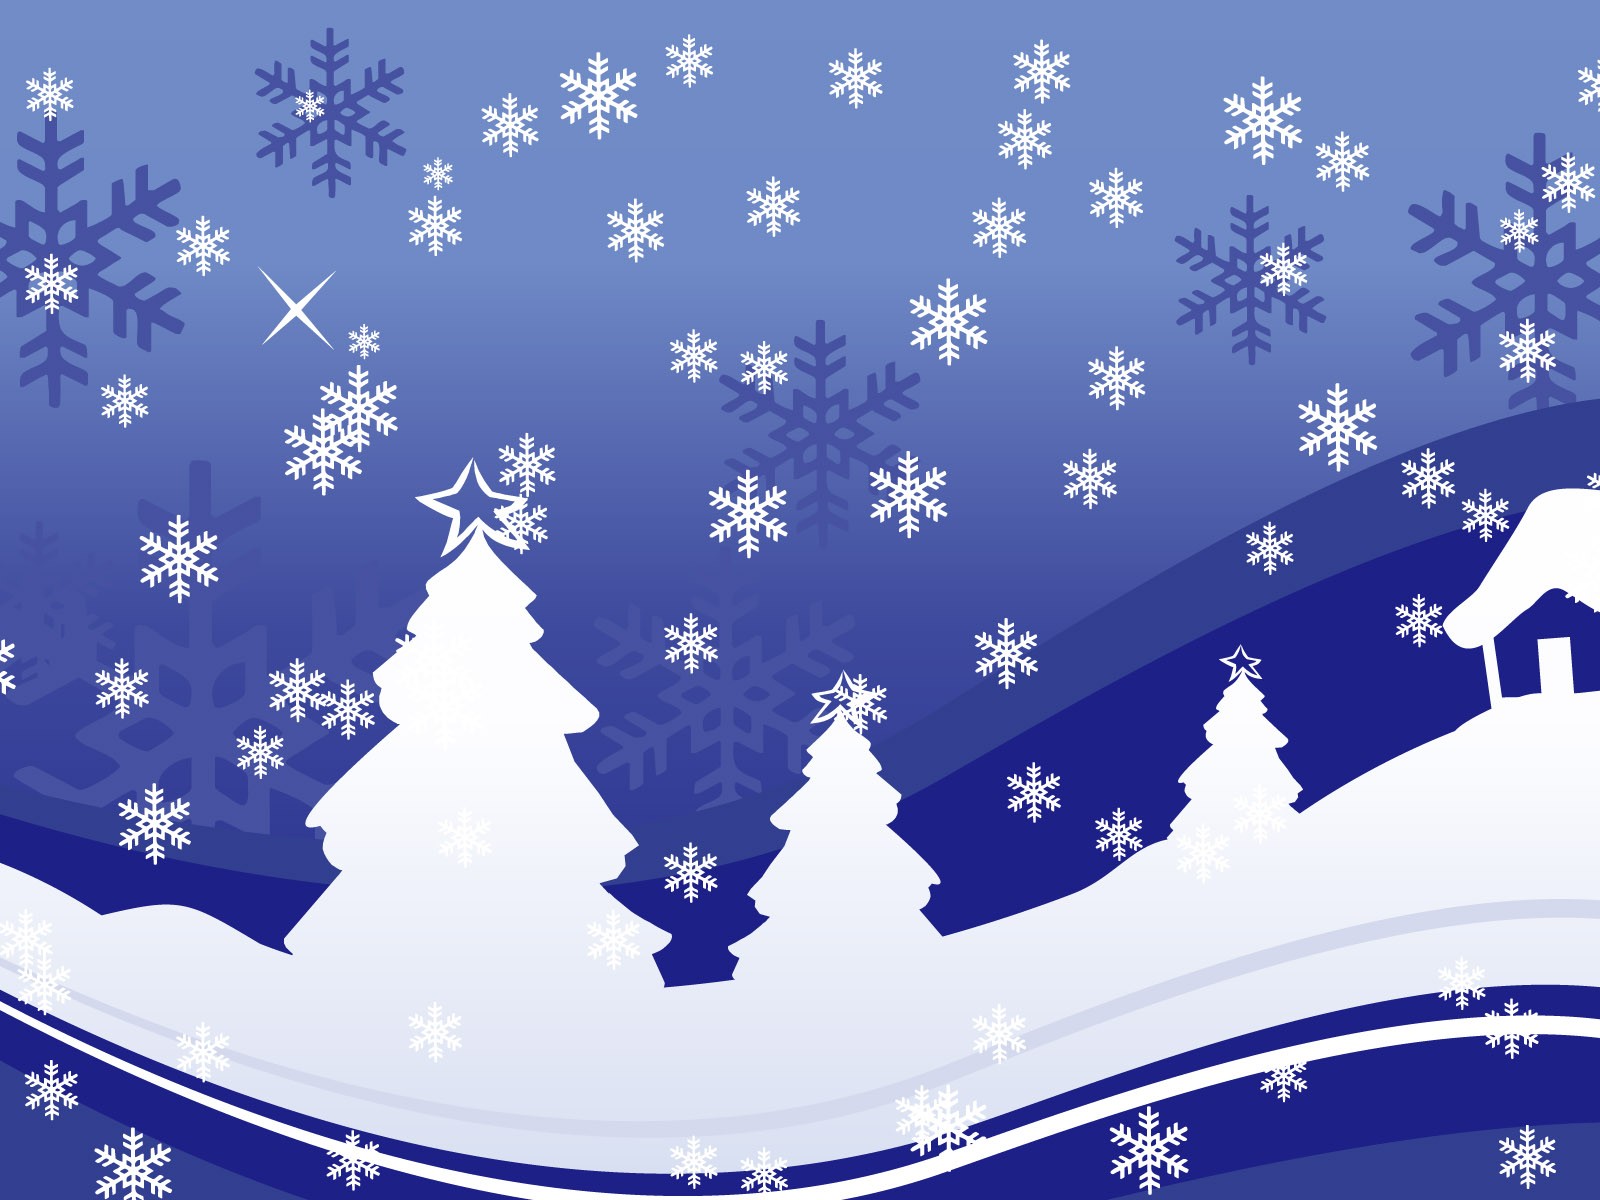 Exquisite Christmas Theme HD Wallpapers #33 - 1600x1200